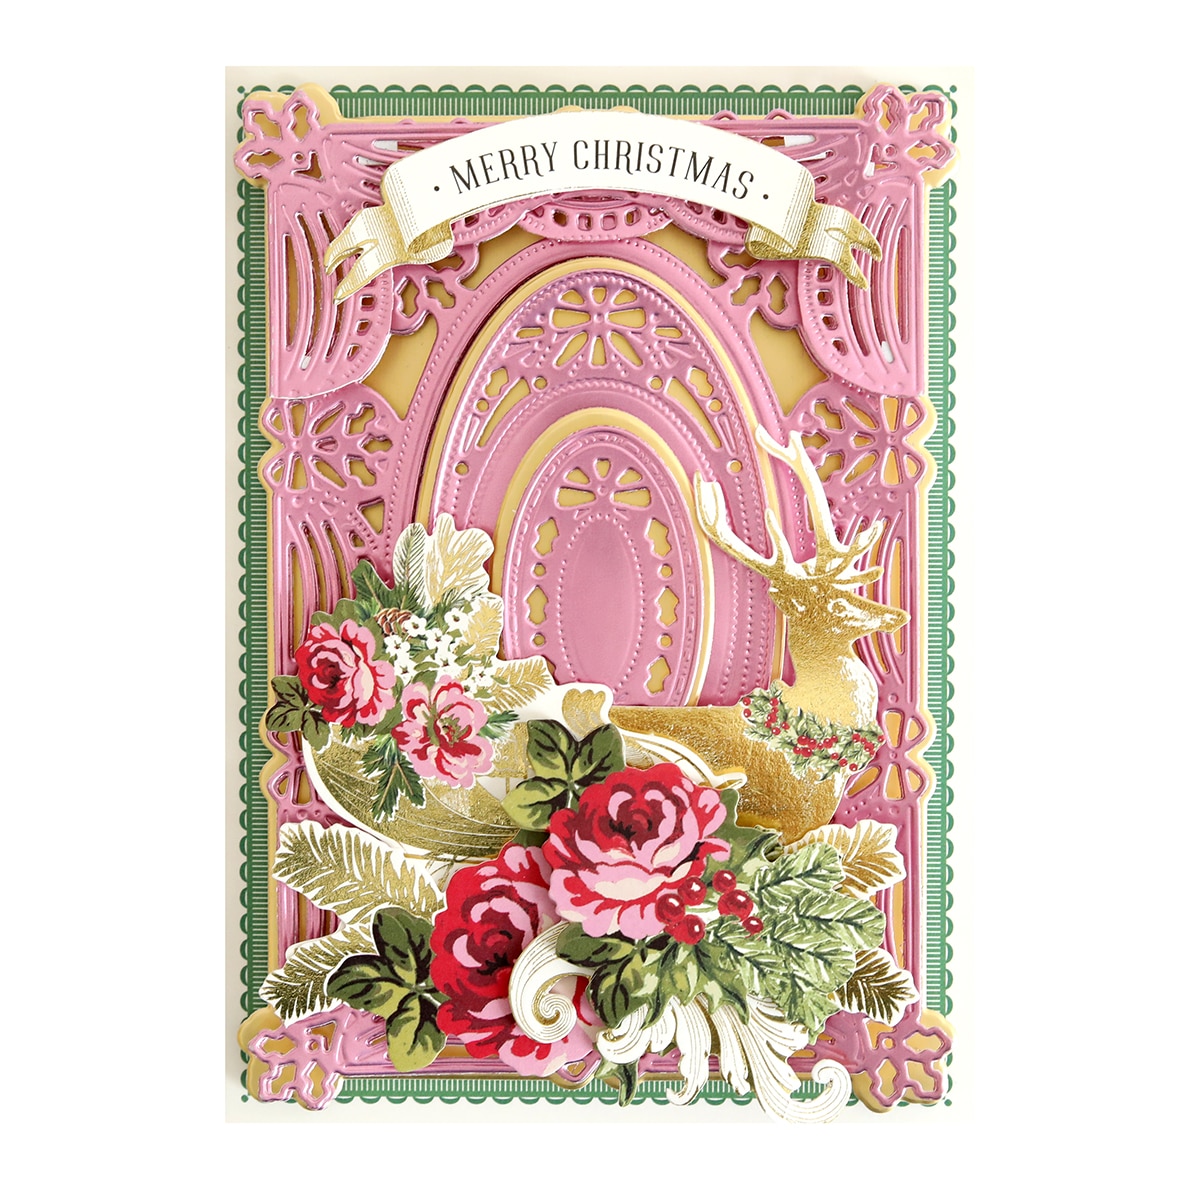 A pink and gold card with a deer and roses.